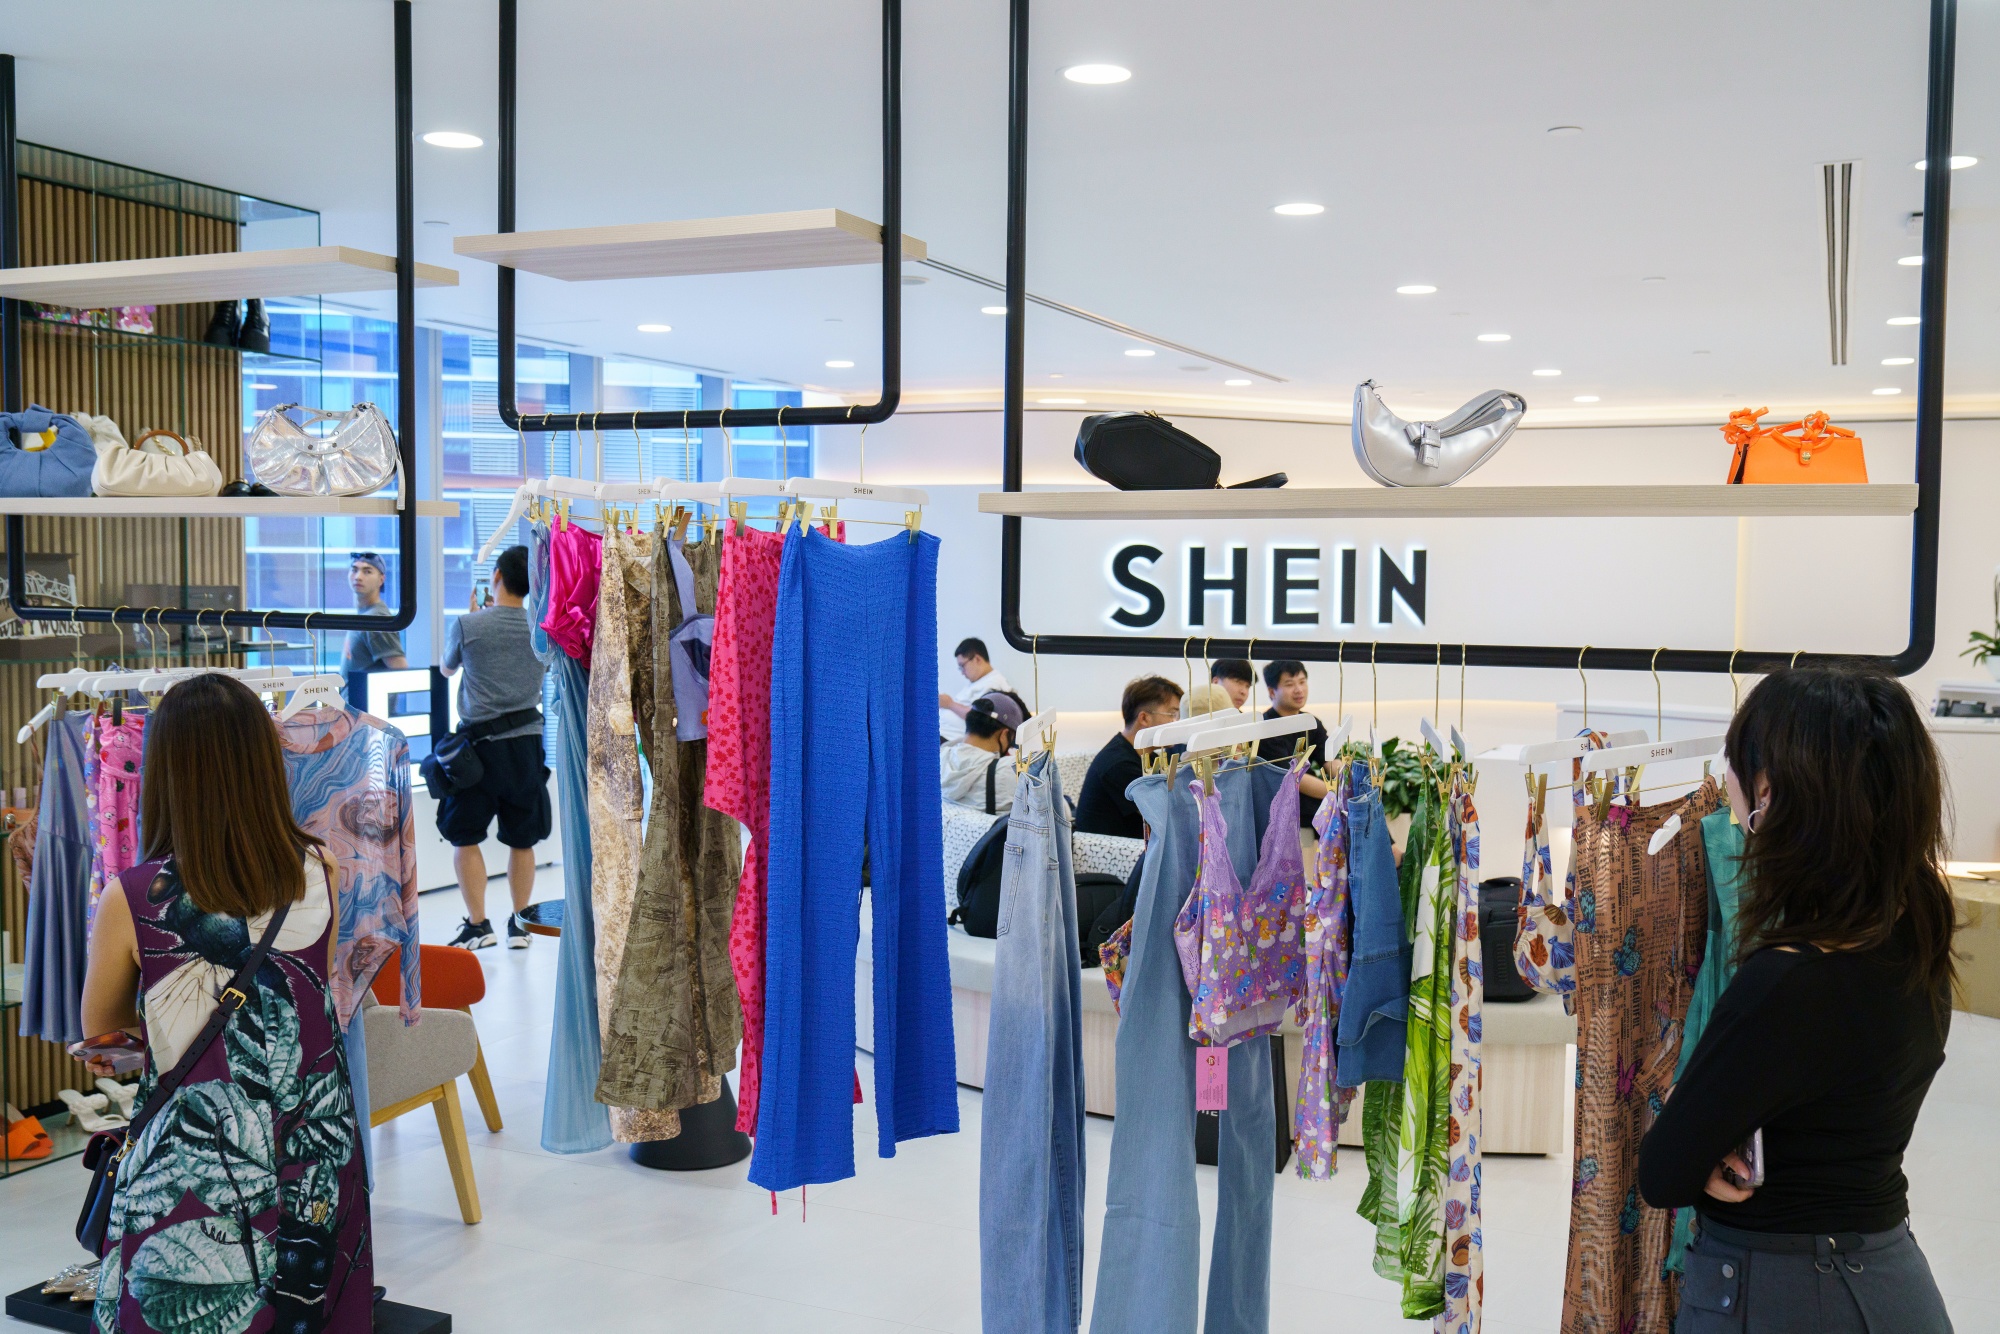 Exclusive: Shein seeks China's permission for US IPO -sources